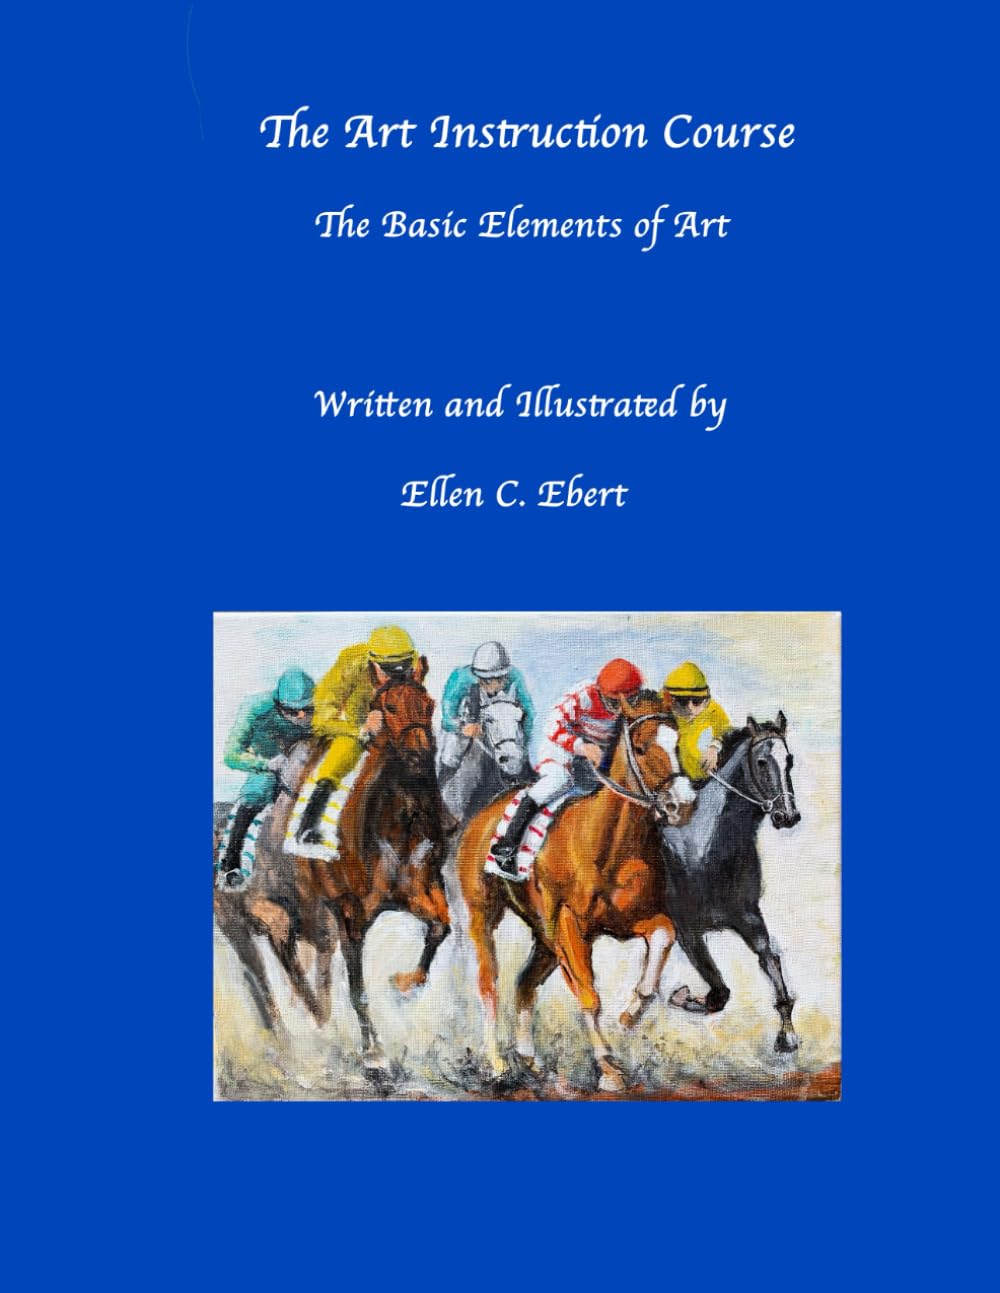 The Art Instruction Course: The Basic Elements of Art